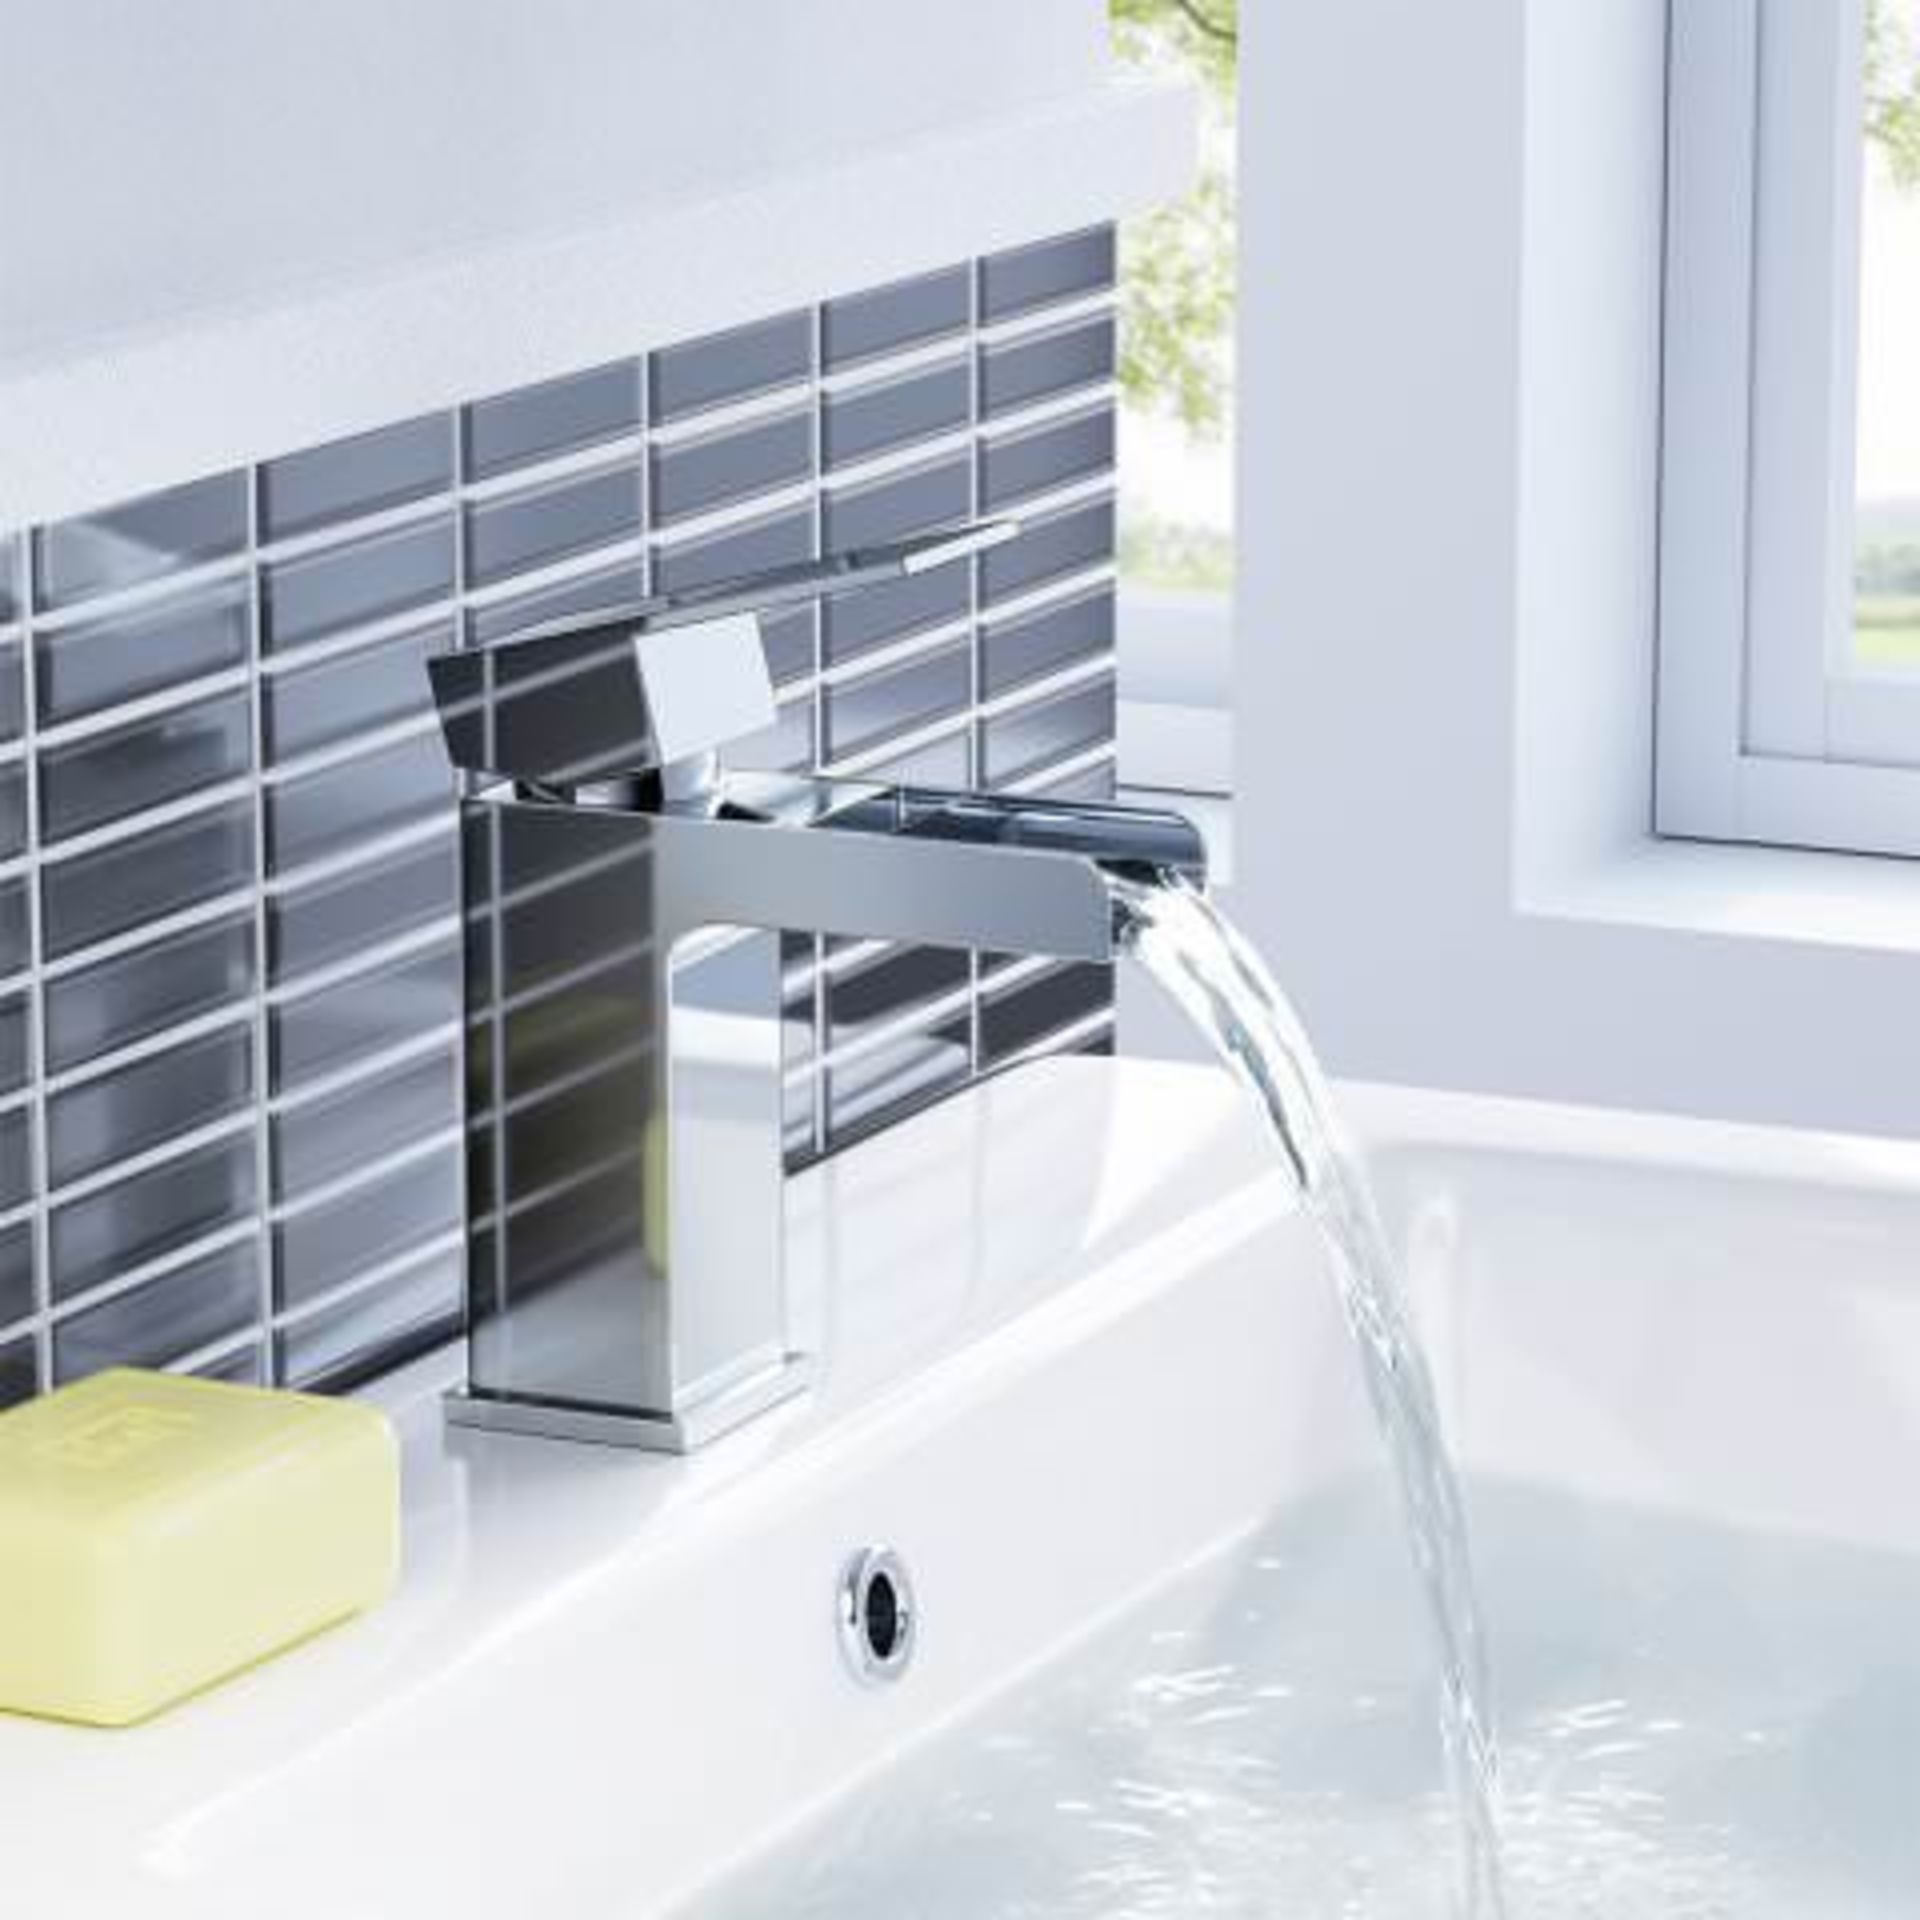 (H113) Niagra II Basin Mixer Tap Waterfall Feature Our range of waterfall taps add a contemporary - Image 3 of 3